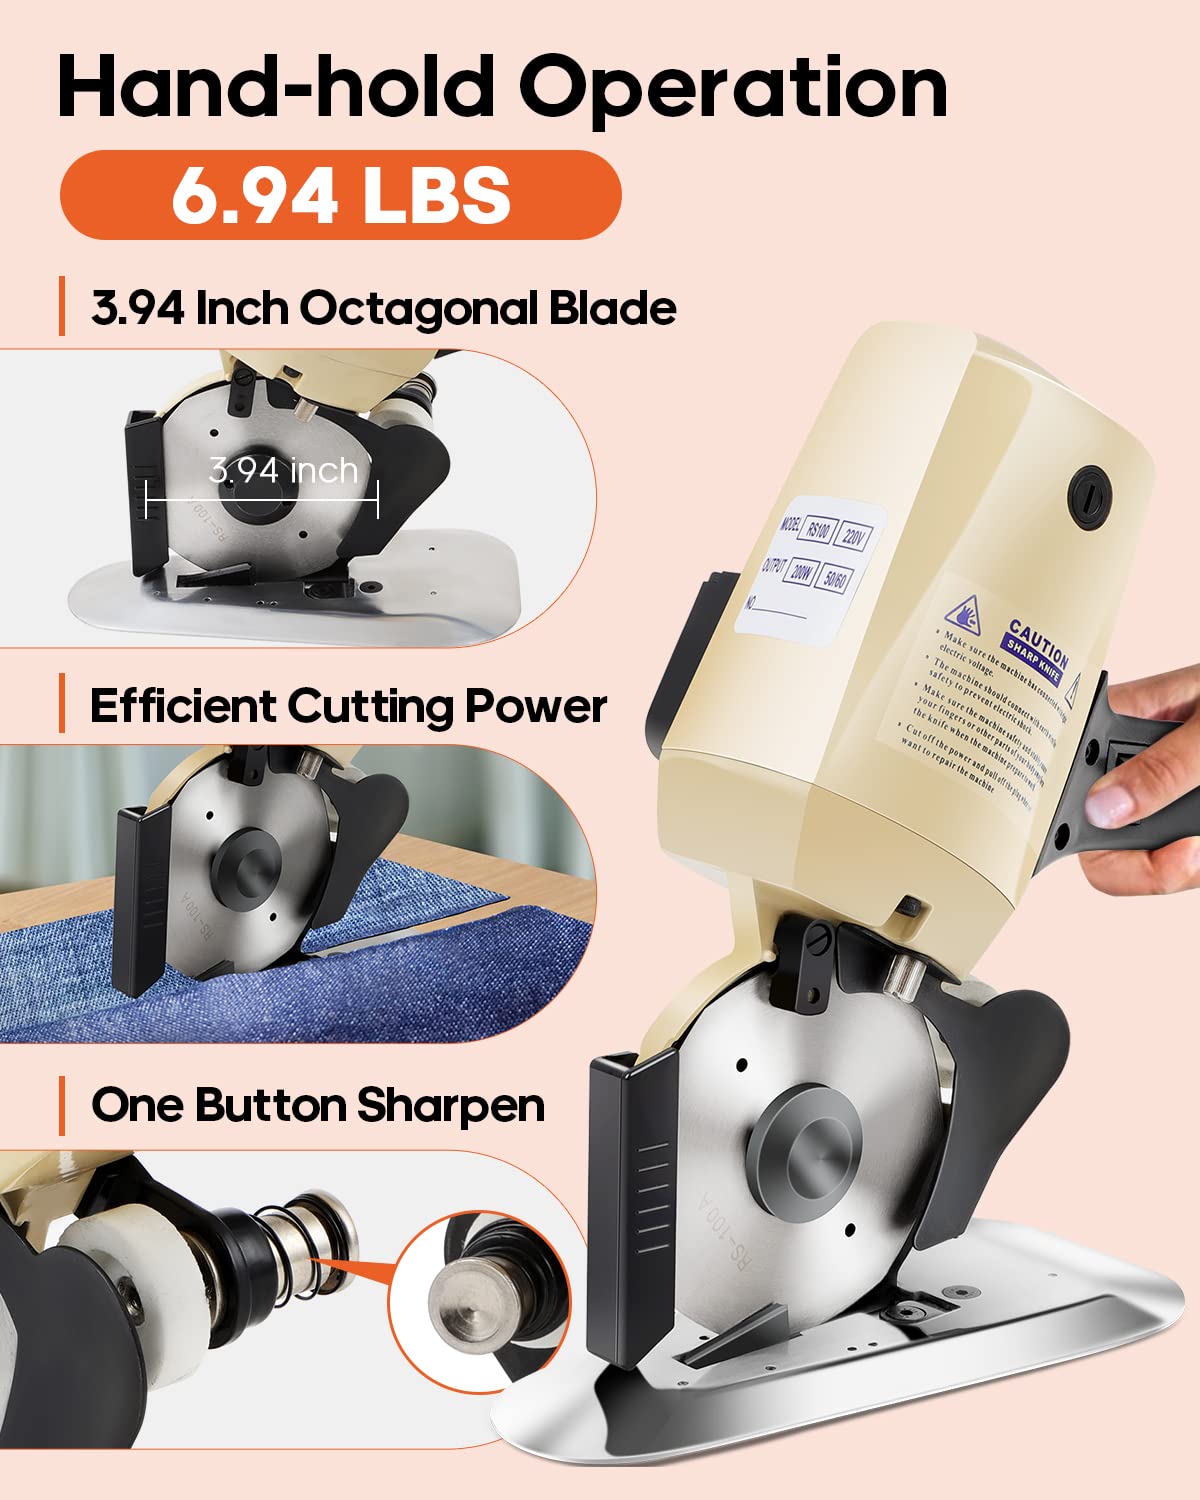 110V Electric Rotary Fabric Cutter Cloth Cutting Machine 4 Inch (100mm) Octagonal Blade Cloth Cutter Electric Scissors With Automatic Sharpener For Multi Layer Carpet Leather